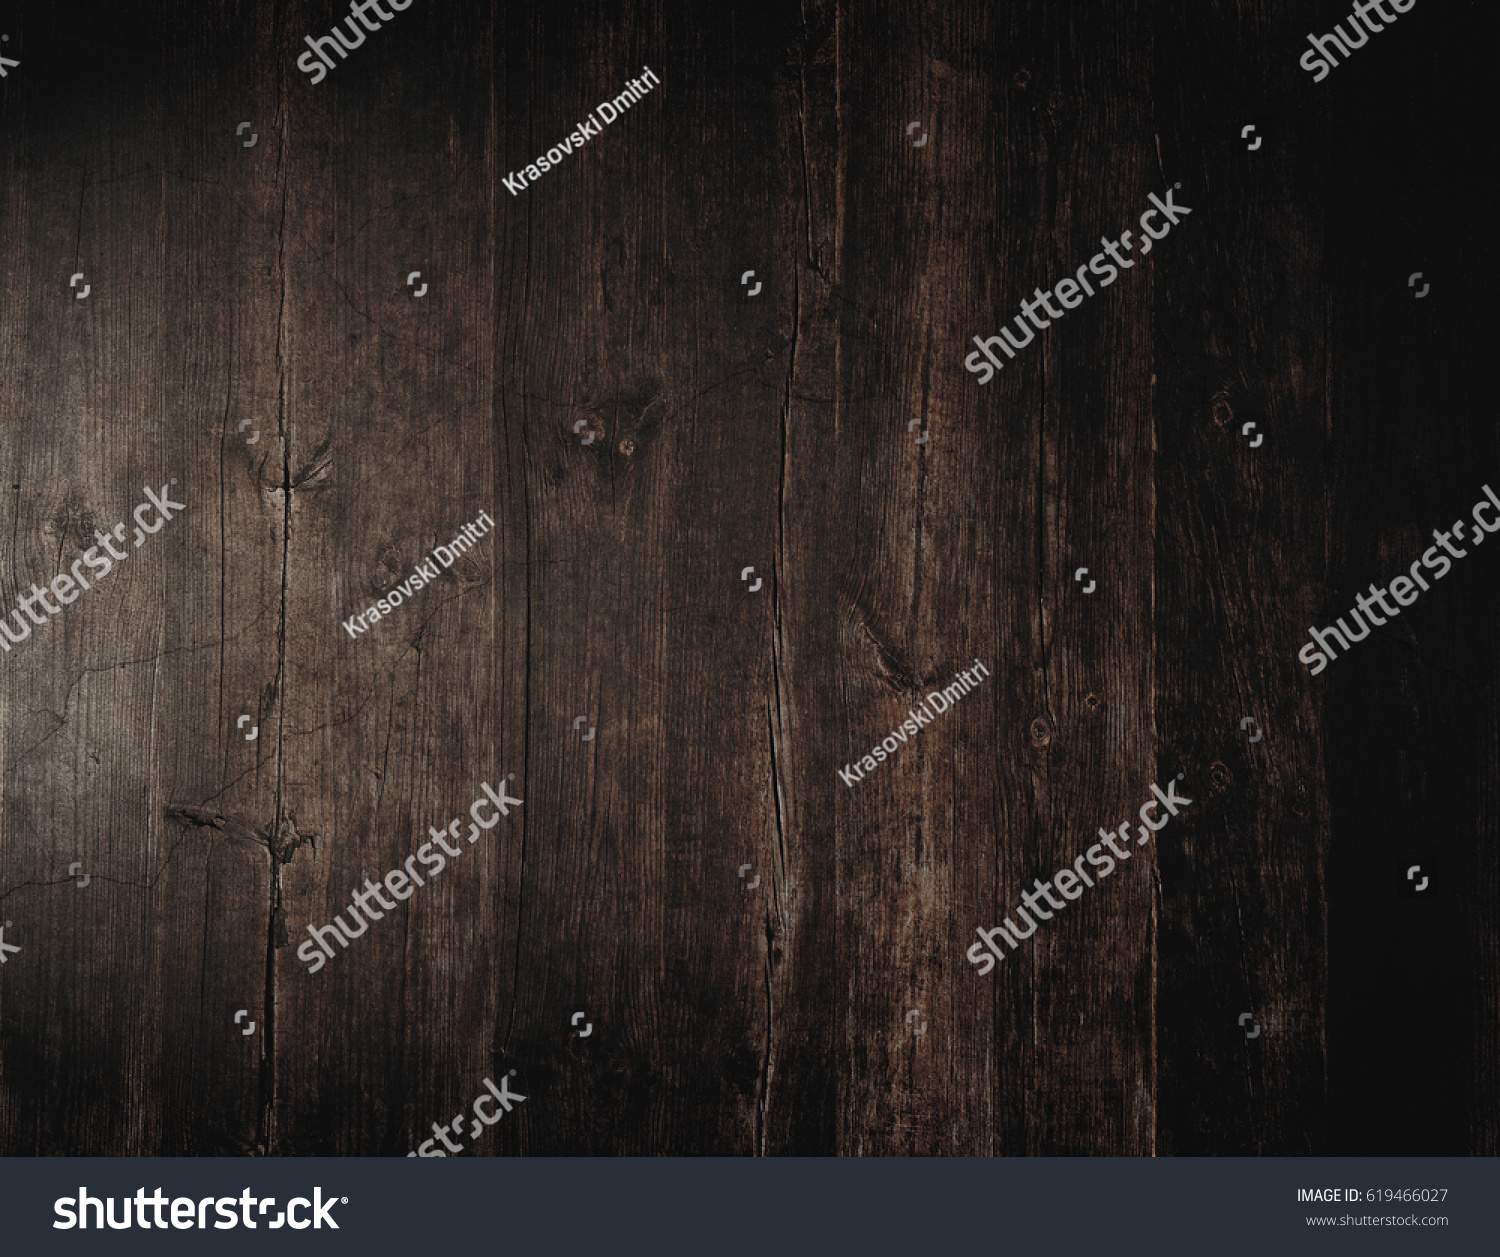 Light on wood. Board. Old background. Rustic style #619466027